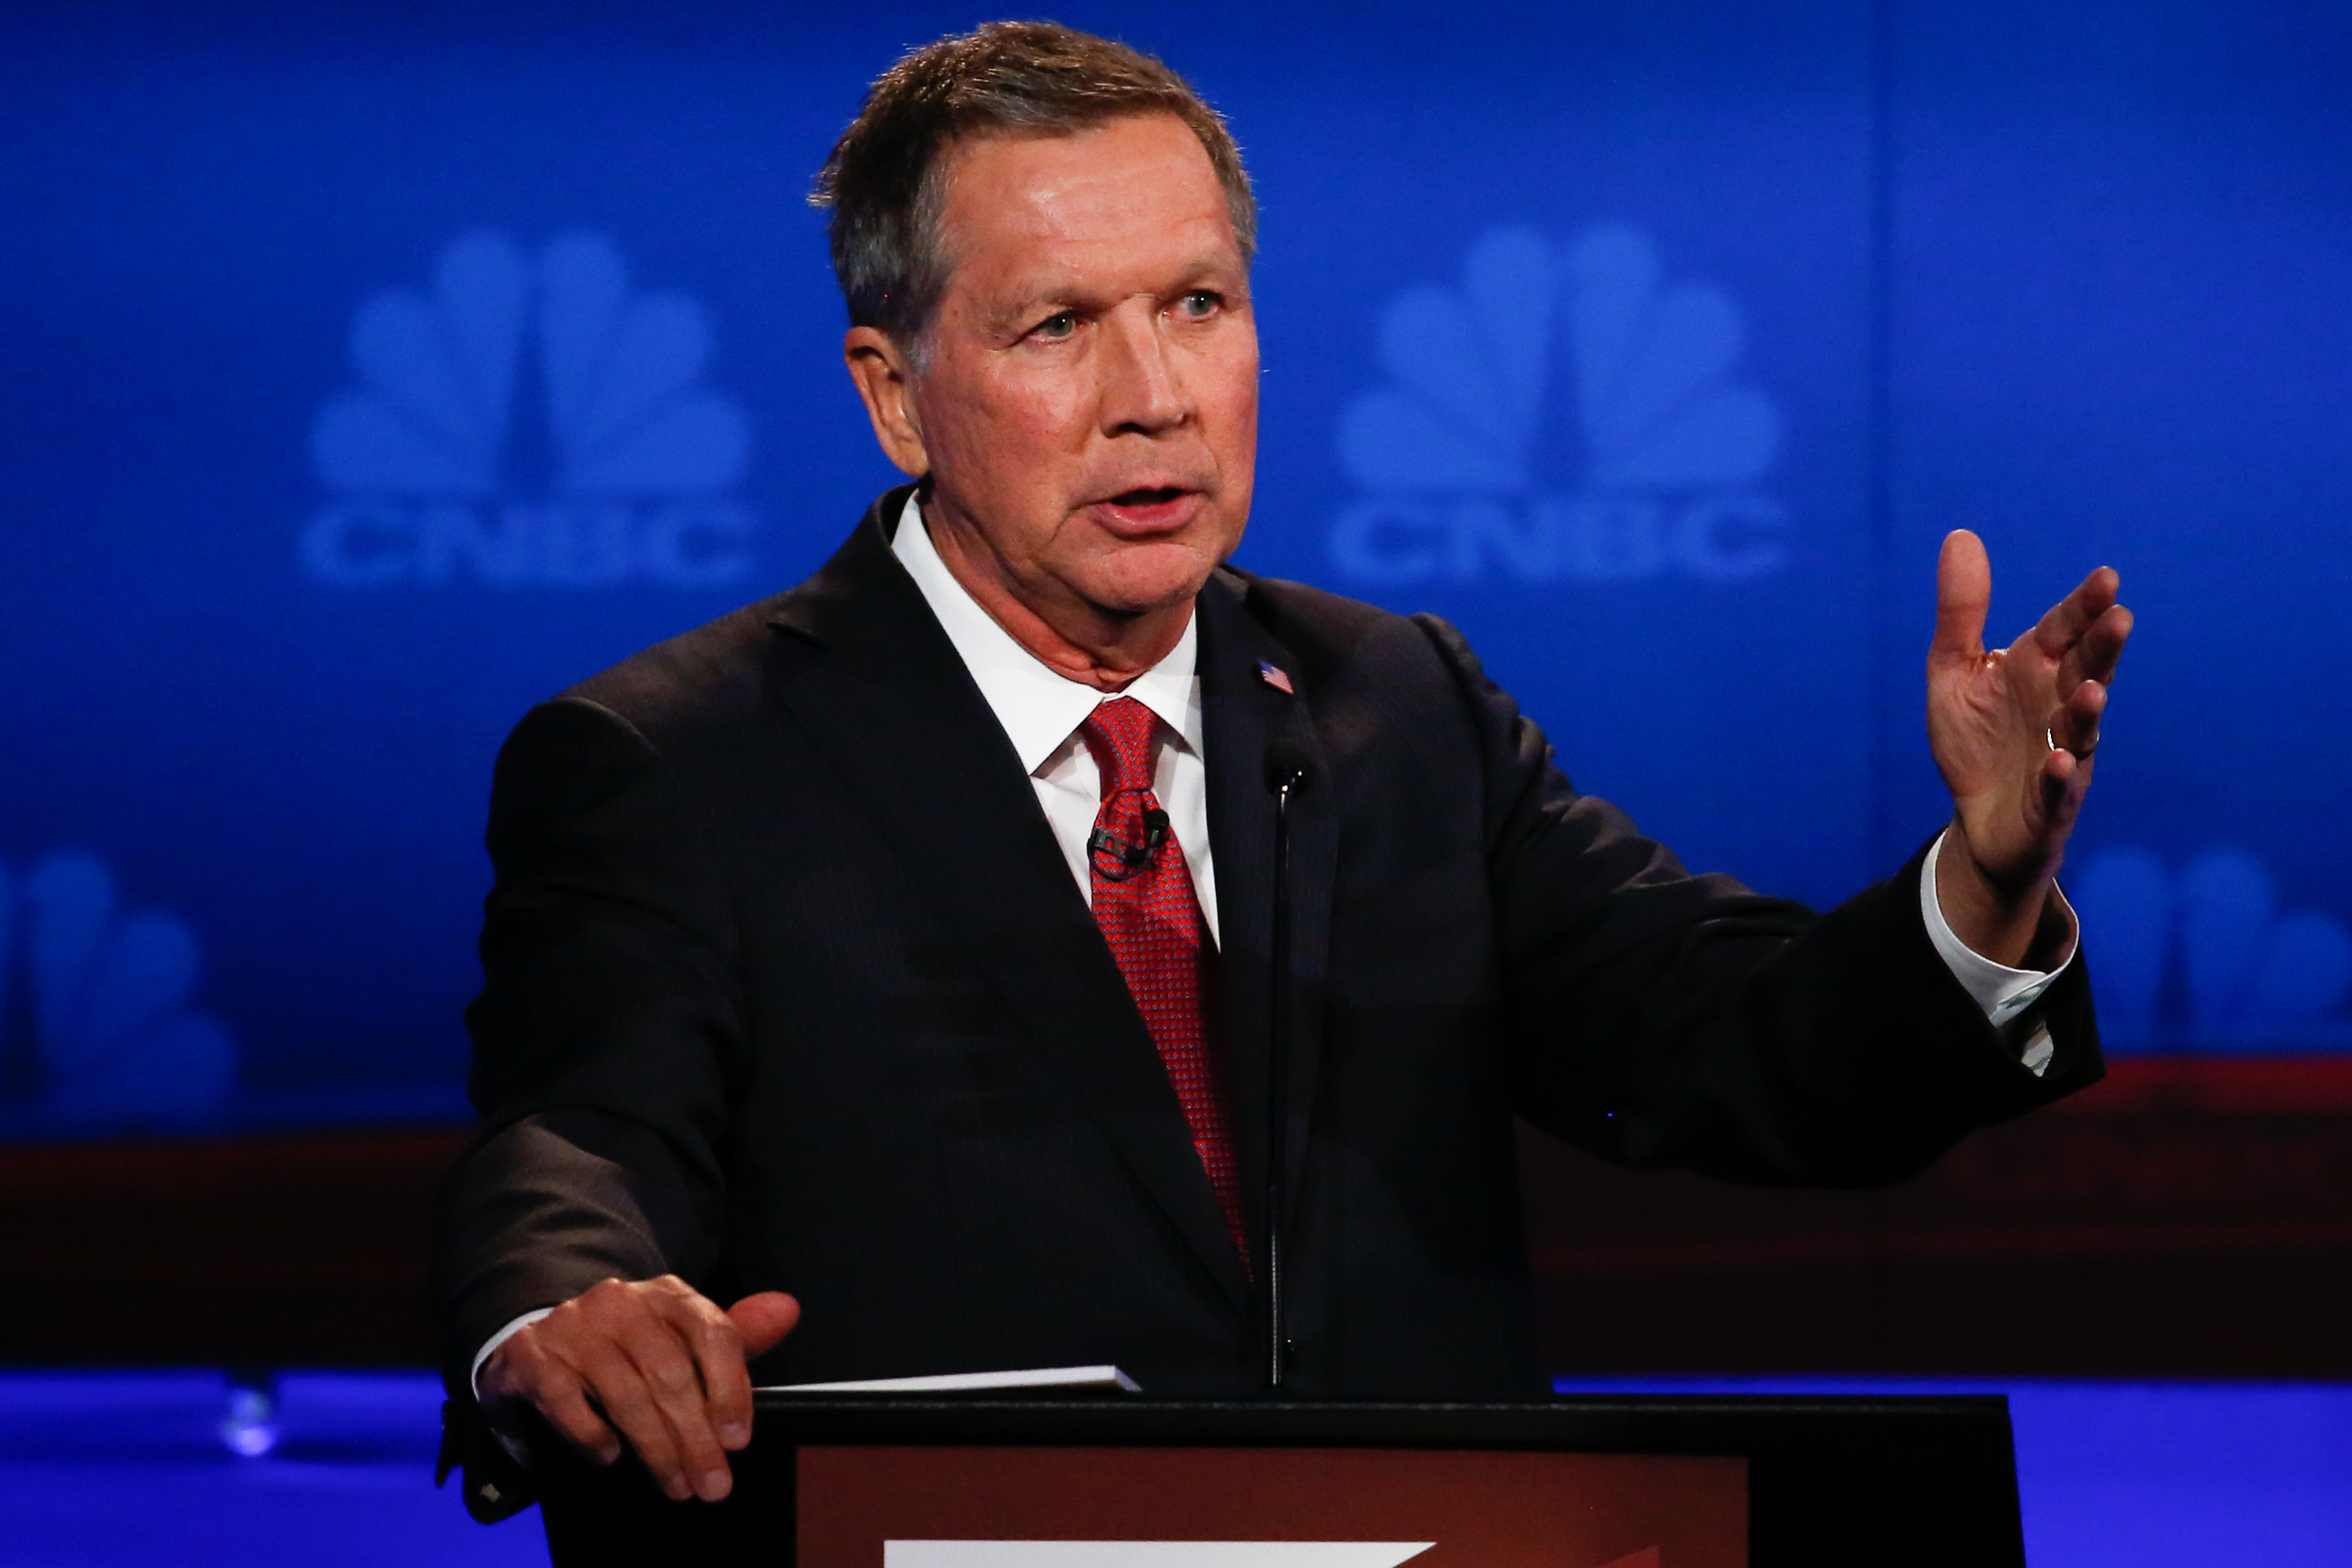 John Kasich participates in CNBC's "Your Money, Your Vote: The Republican Presidential Debate" live from the University of Colorado Boulder in Boulder, Colorado, on Oct, 28, 2015.